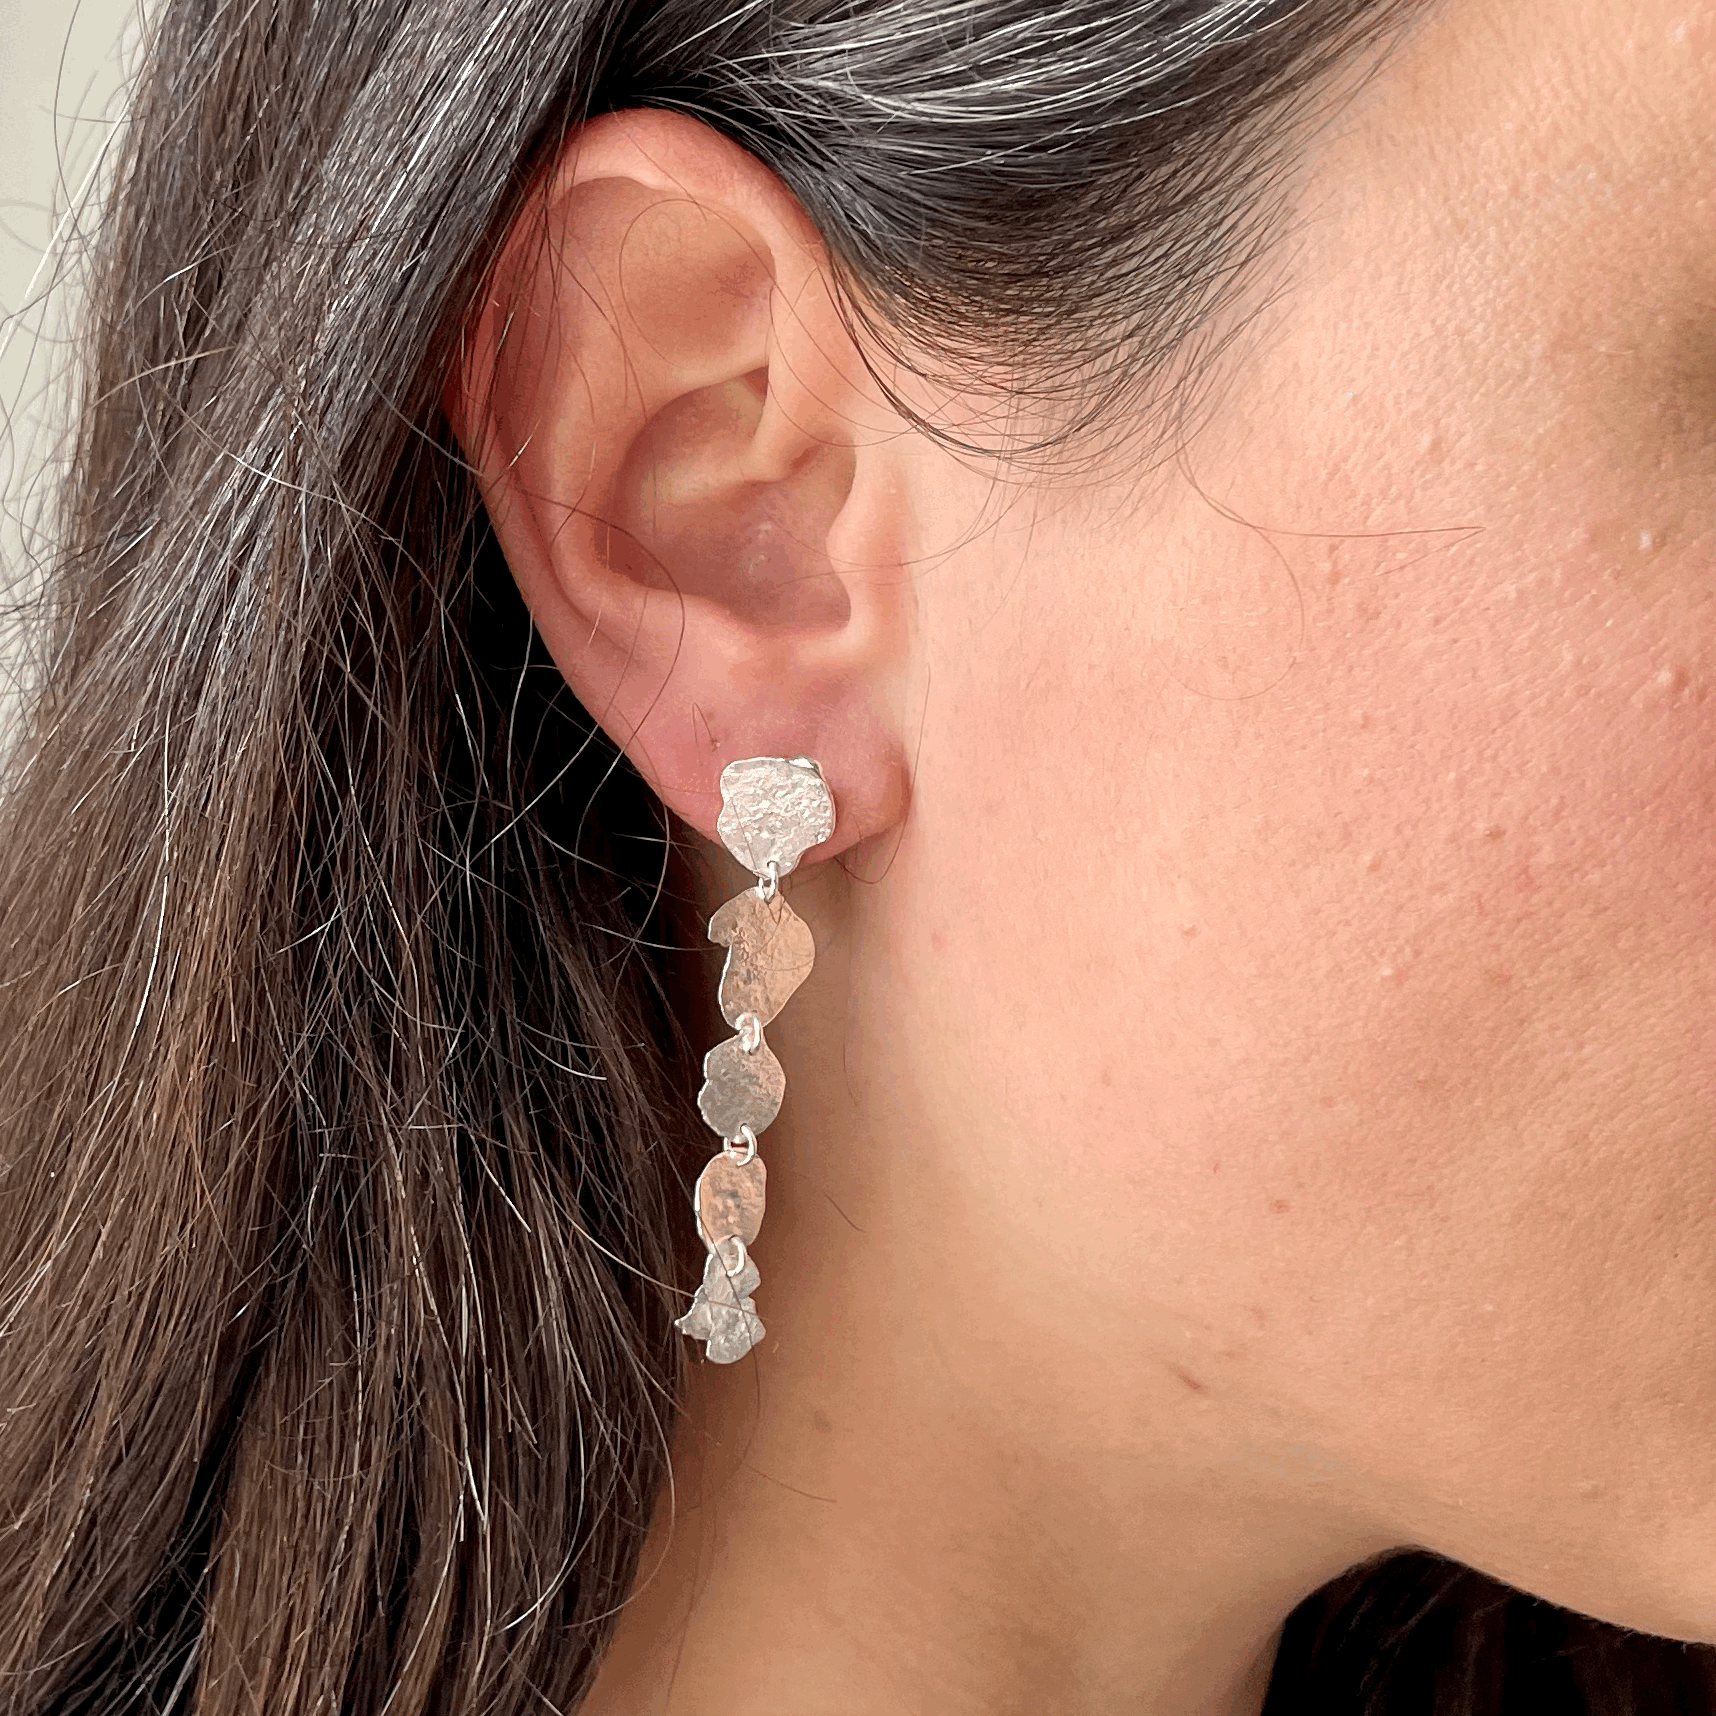 Ponds Earrings: handmade from melting recycled silver into five articulated pond shapes that move as you do. Worn by a model.